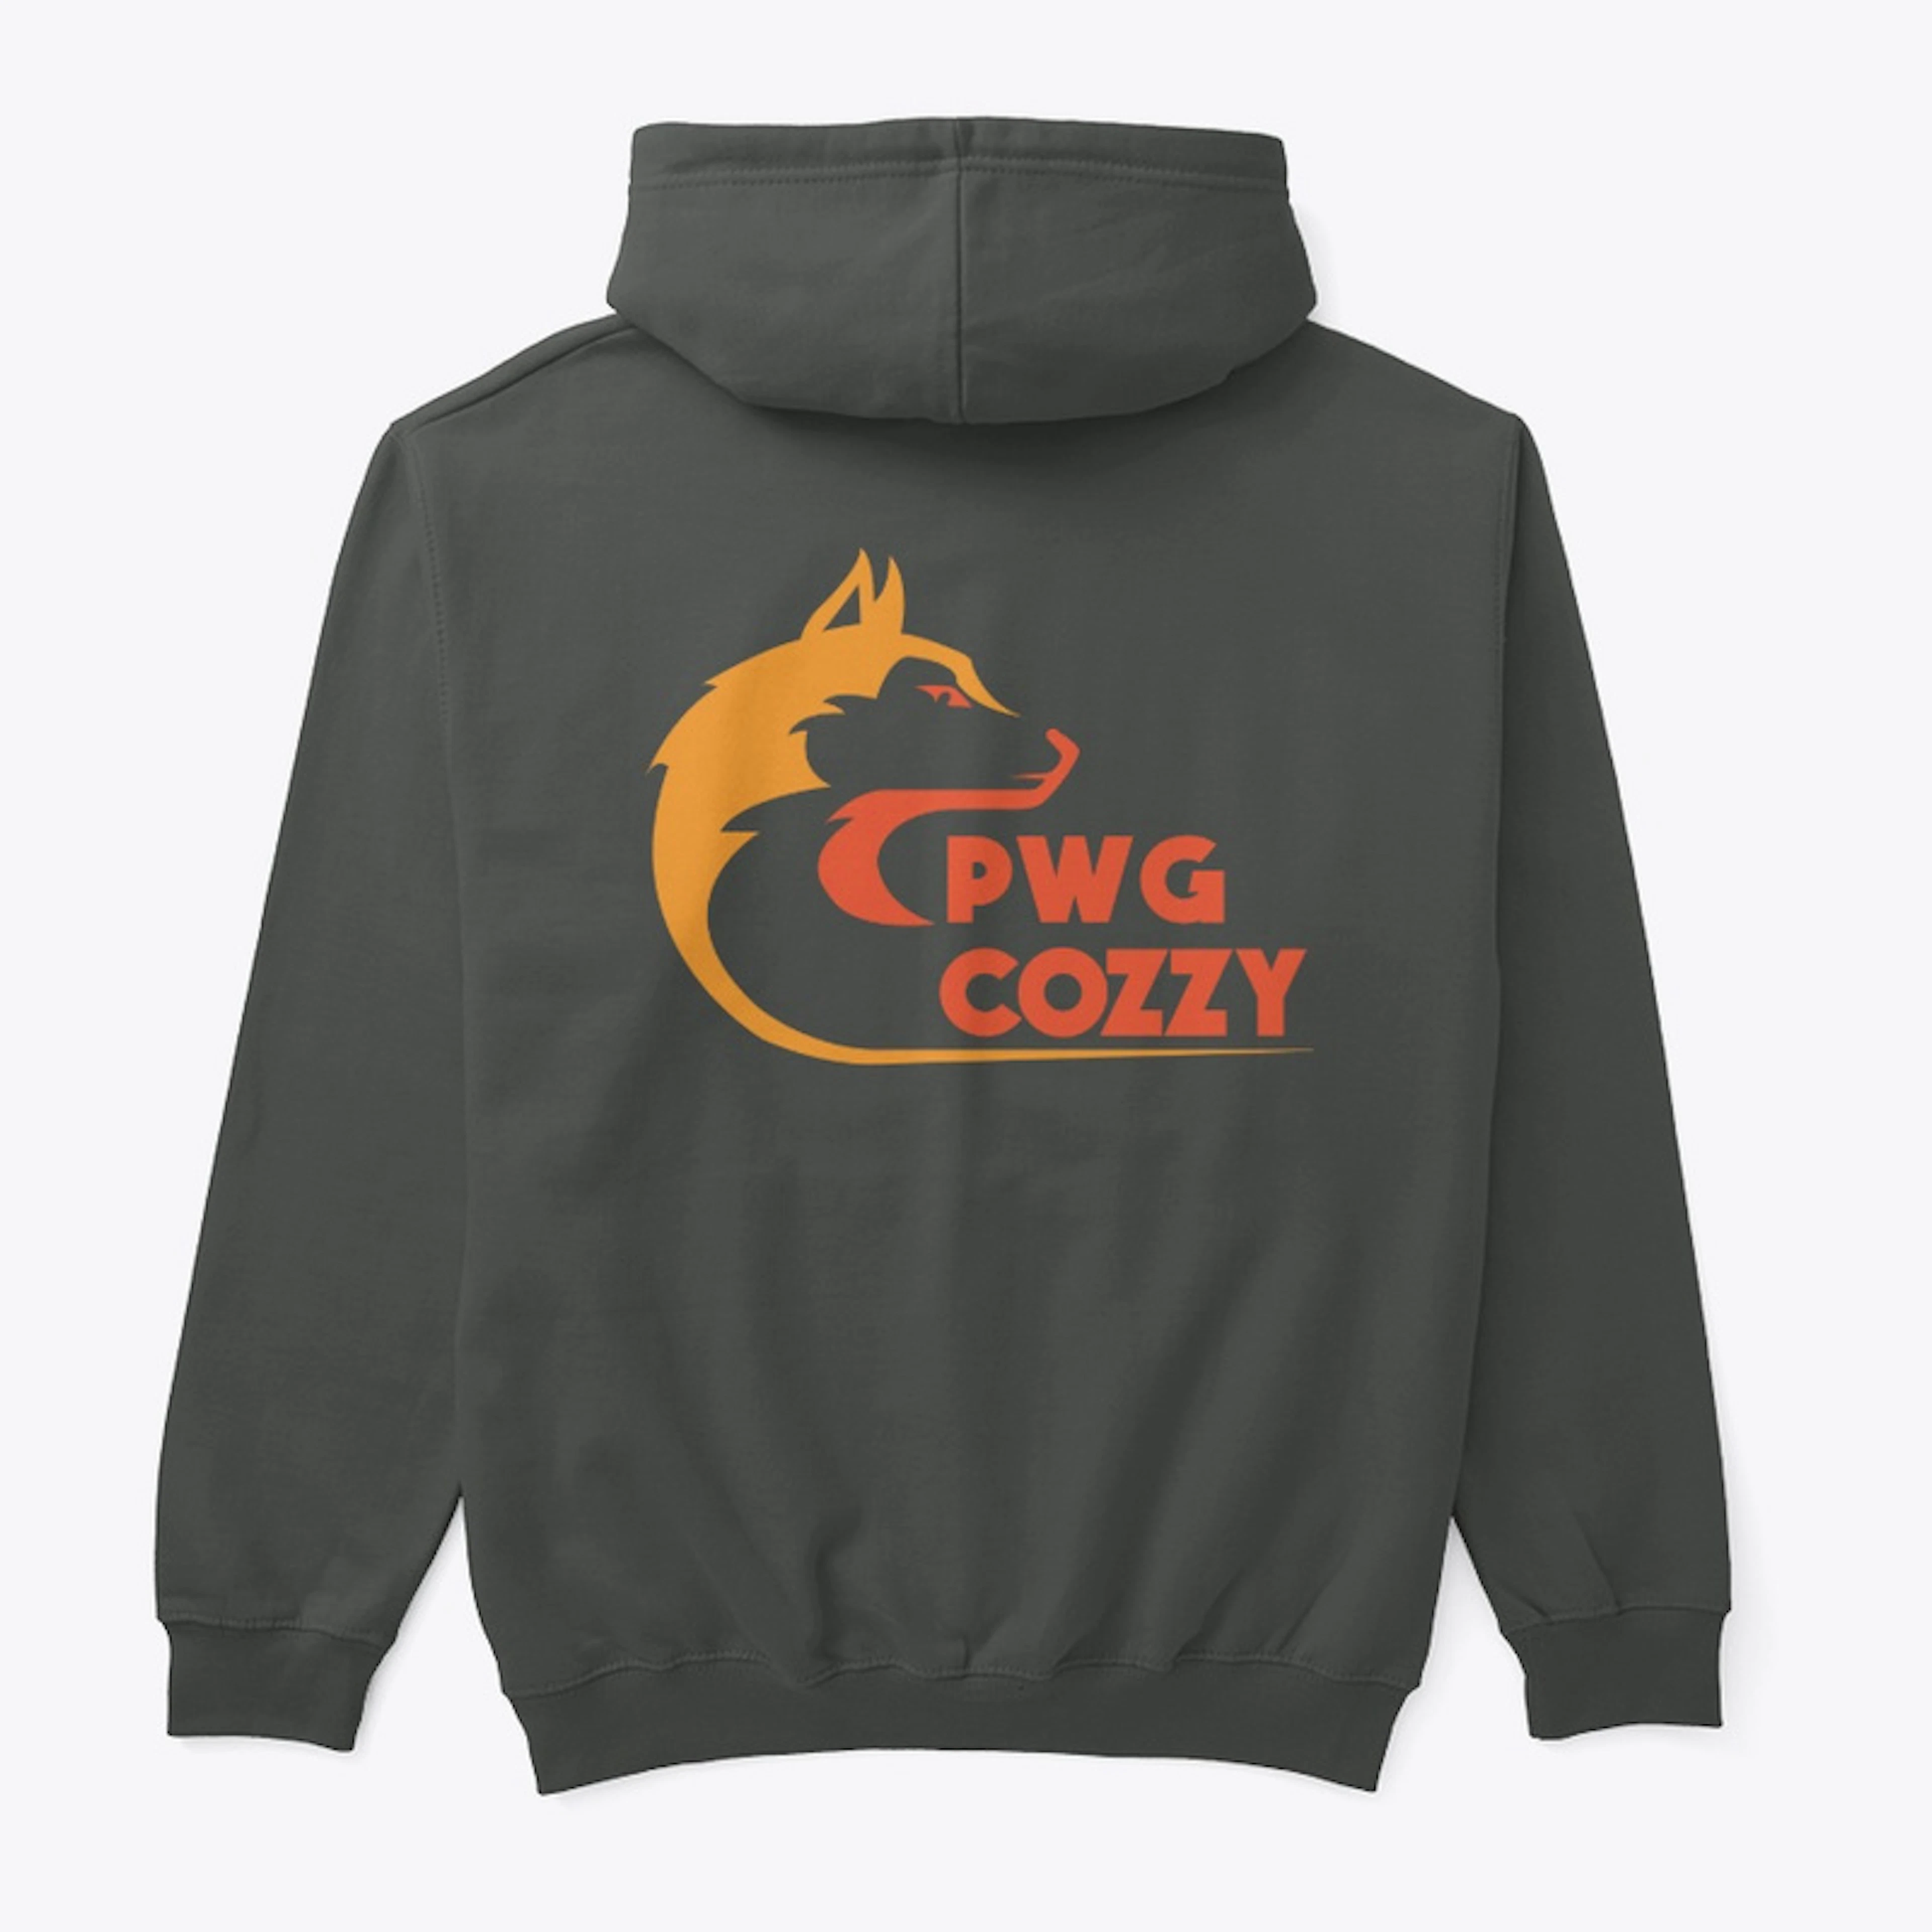 PWG Cozzy pull over 